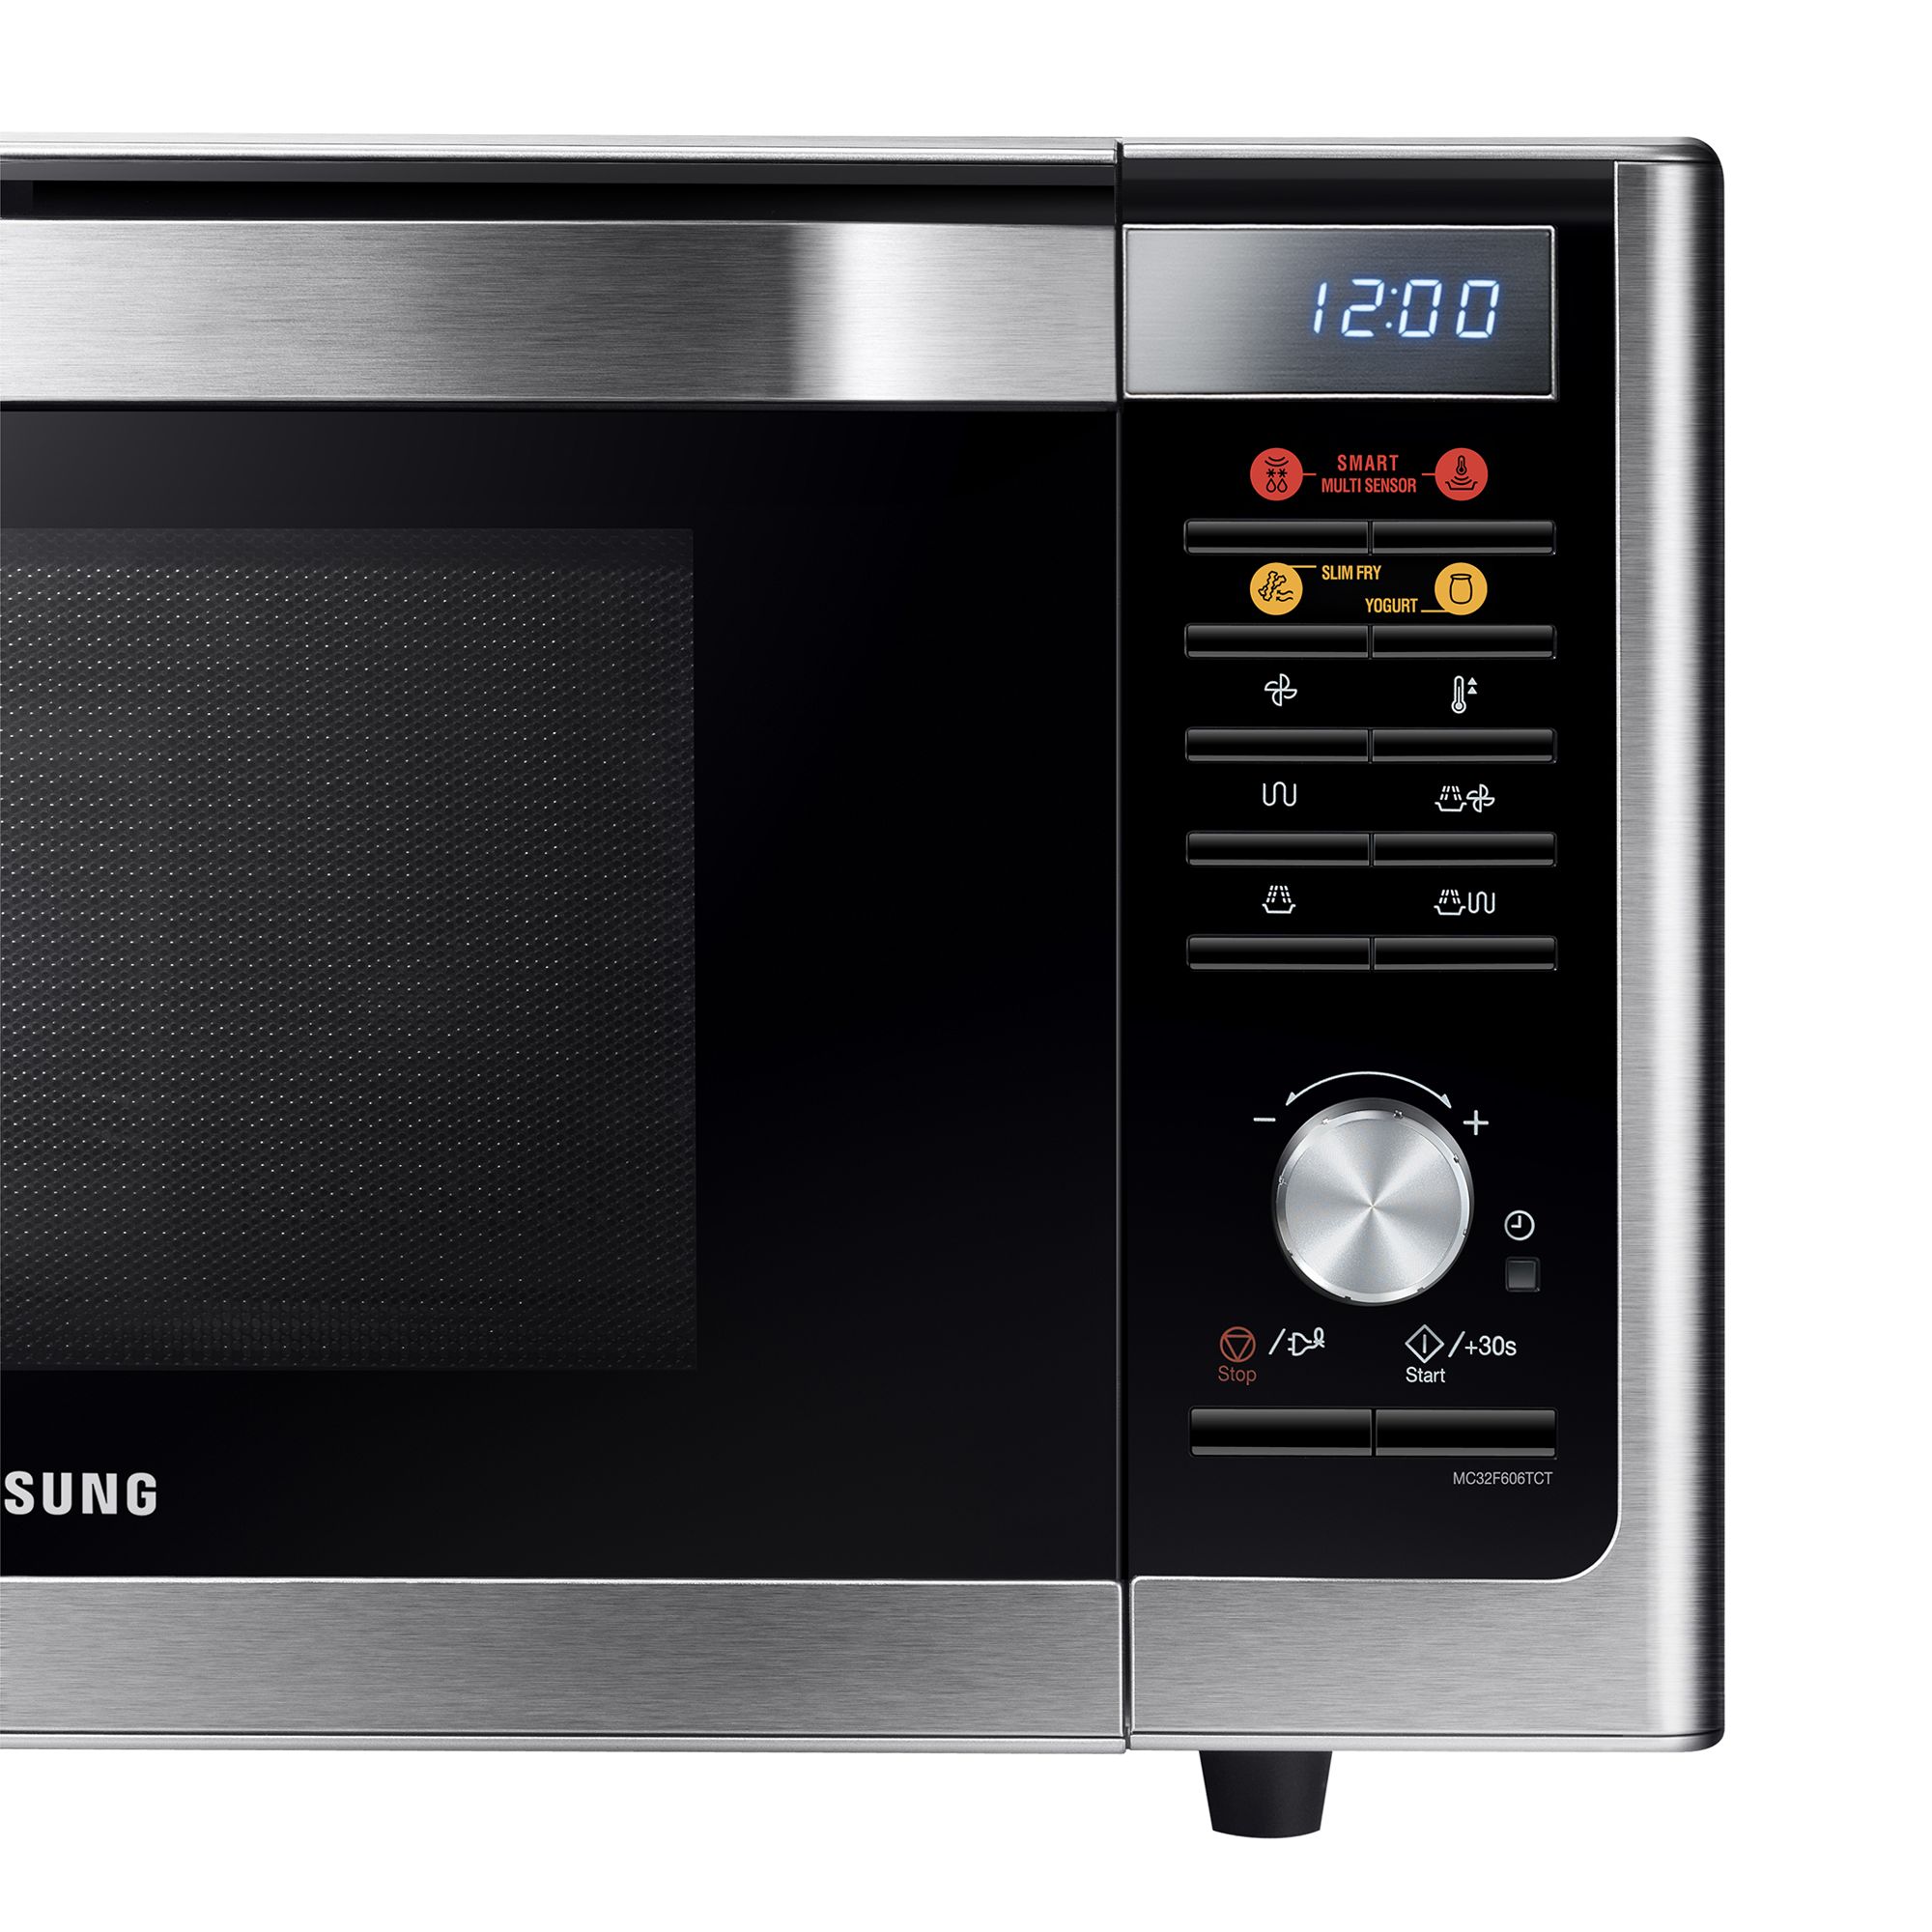 Samsung MC32F606TCT Smart Microwave Oven with Grill, Stainless Steel at